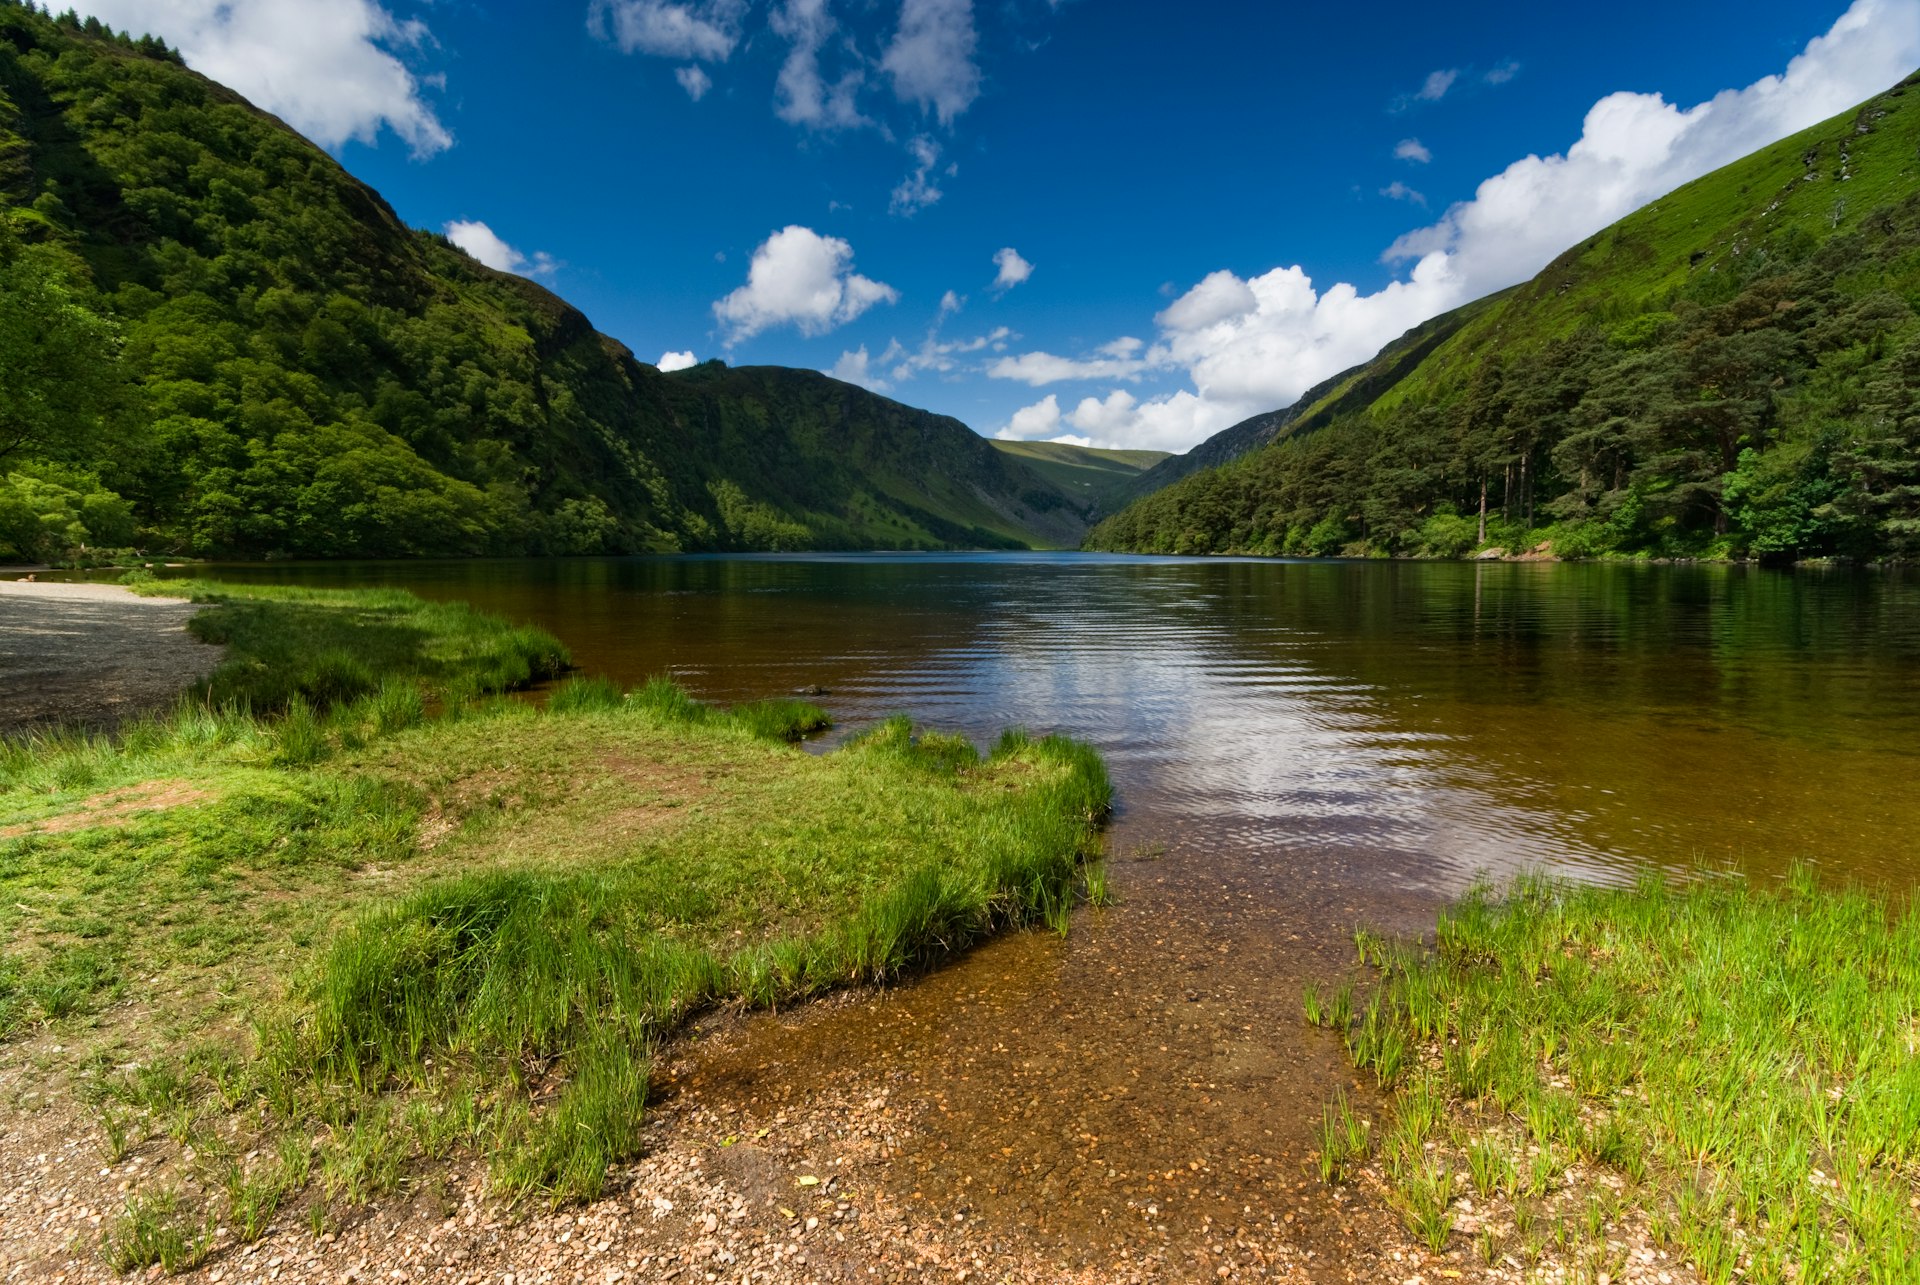 Upper Lake in Glendalough in the Wicklow Mountains National Park